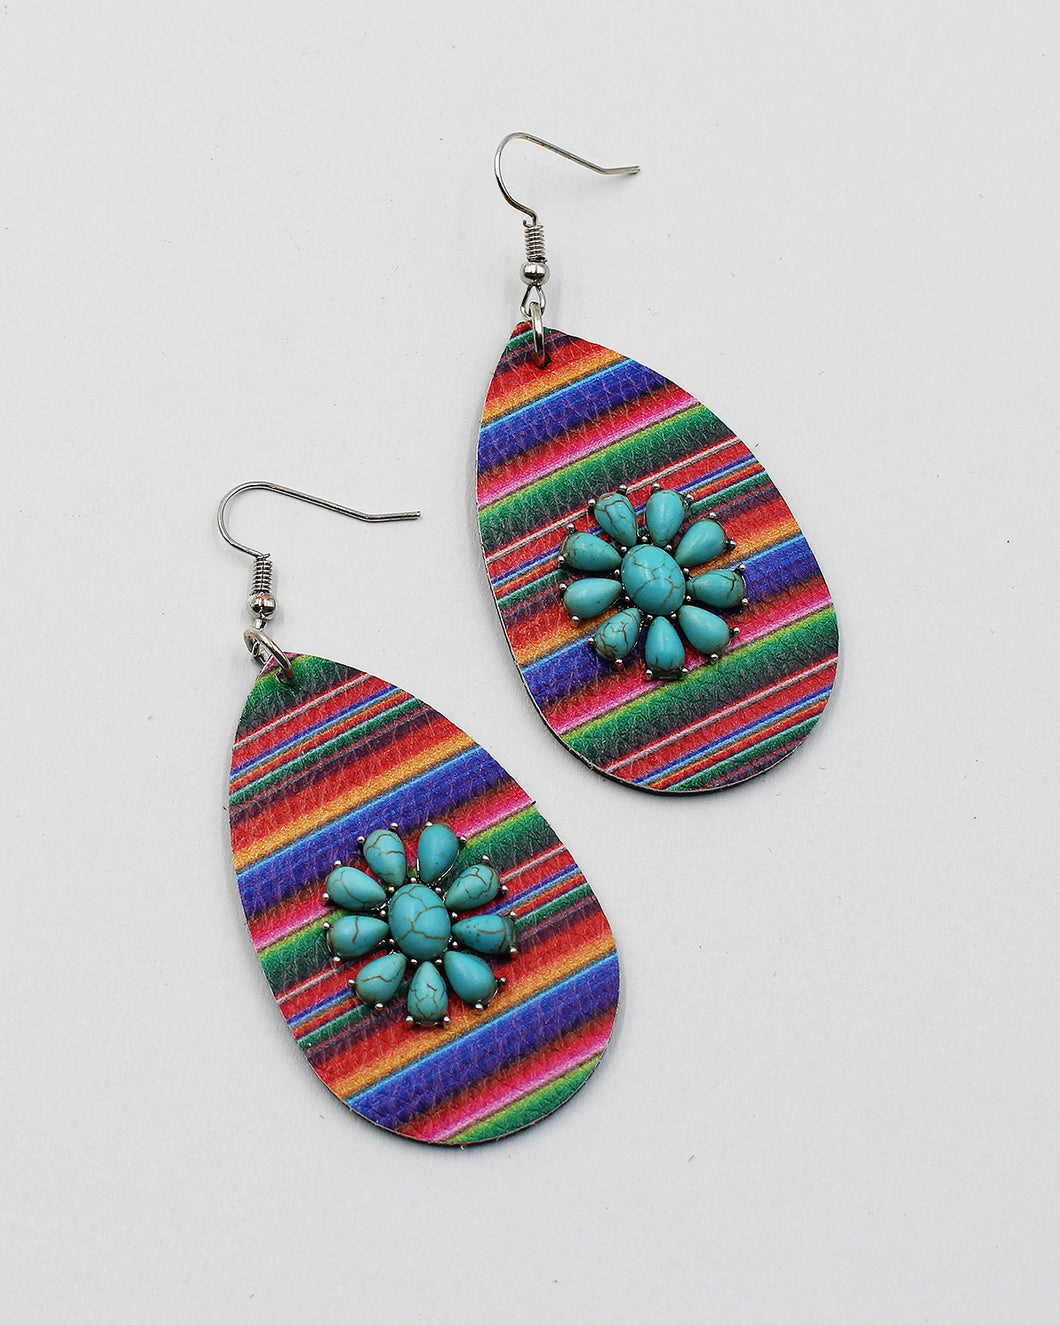 Tear Drop Leather Earrings with Turquoise Flower